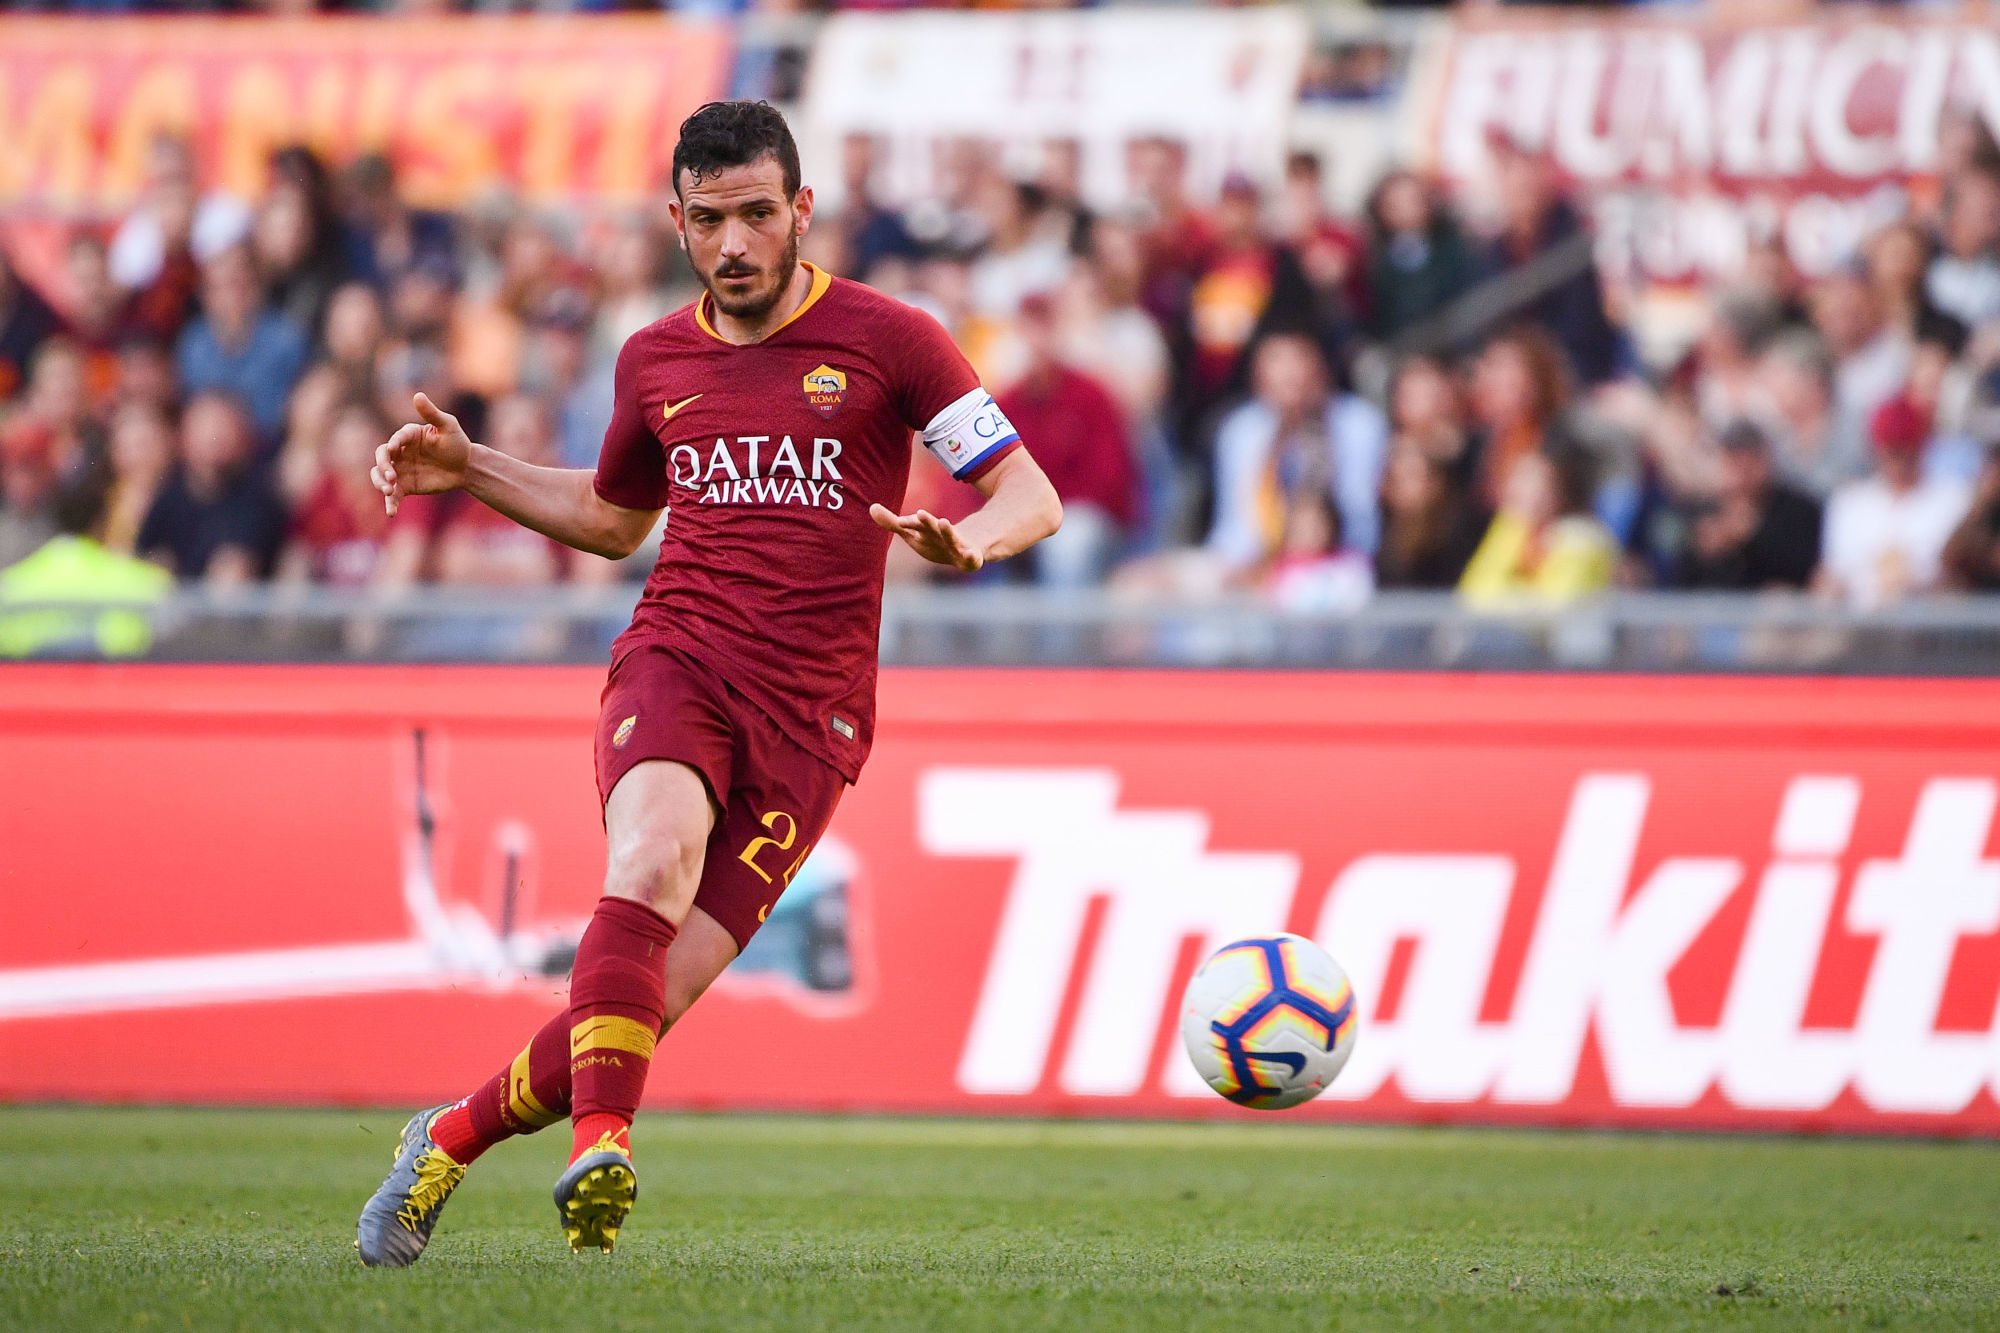 Alessandro Florenzi during the Serie A TIM match between Roma and Cagliari on April 27th, 2019.
Photo : LaPresse / Icon Sport